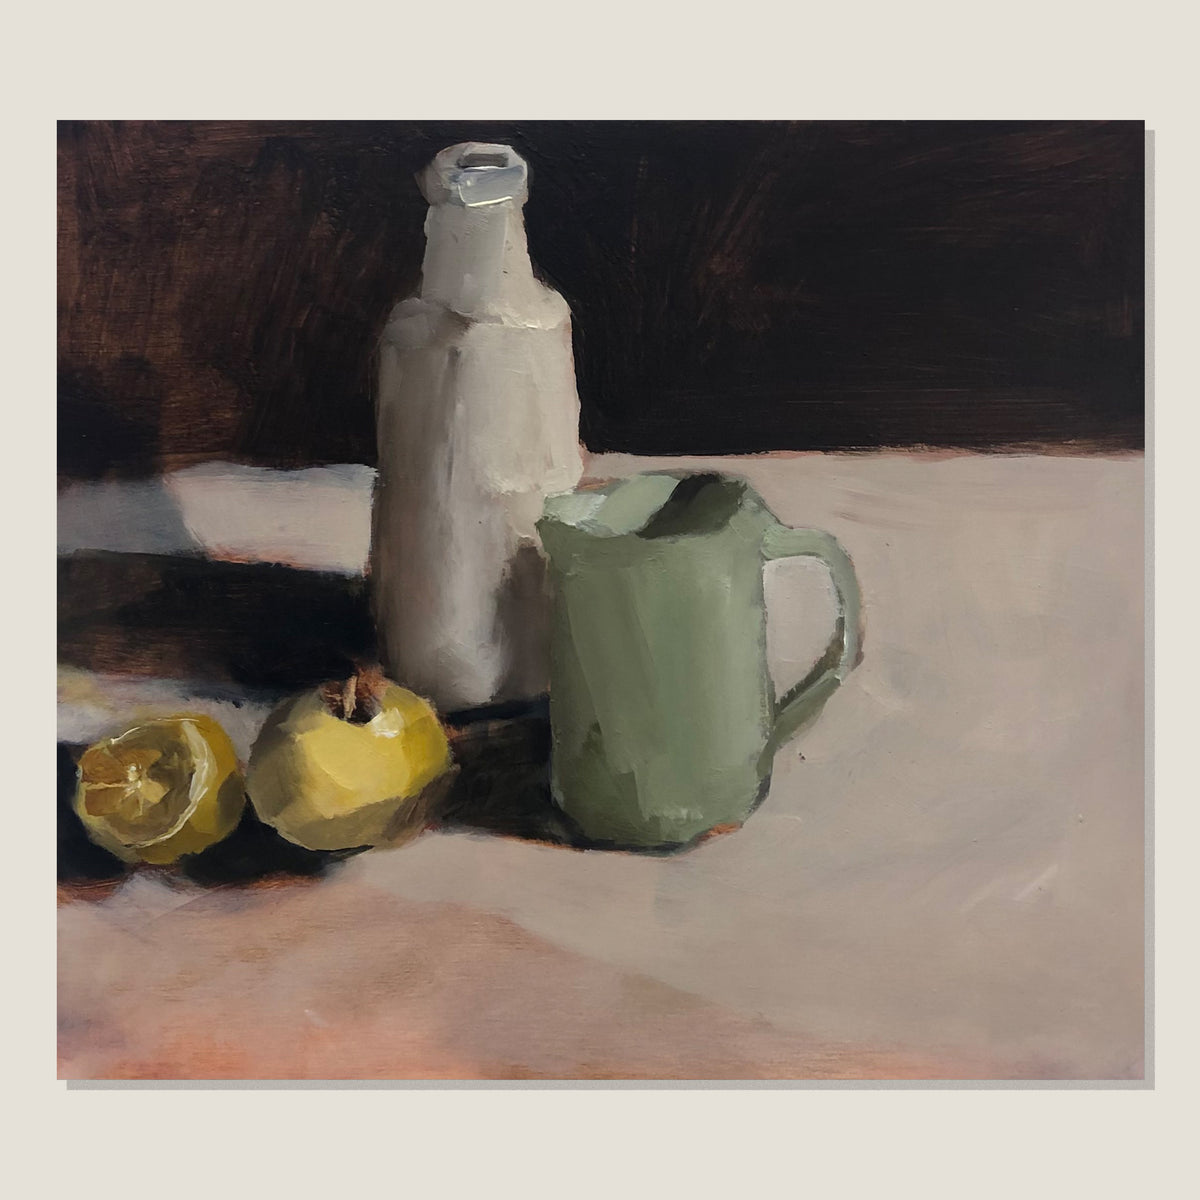 Clay Bottle and Green Jug with Lemons